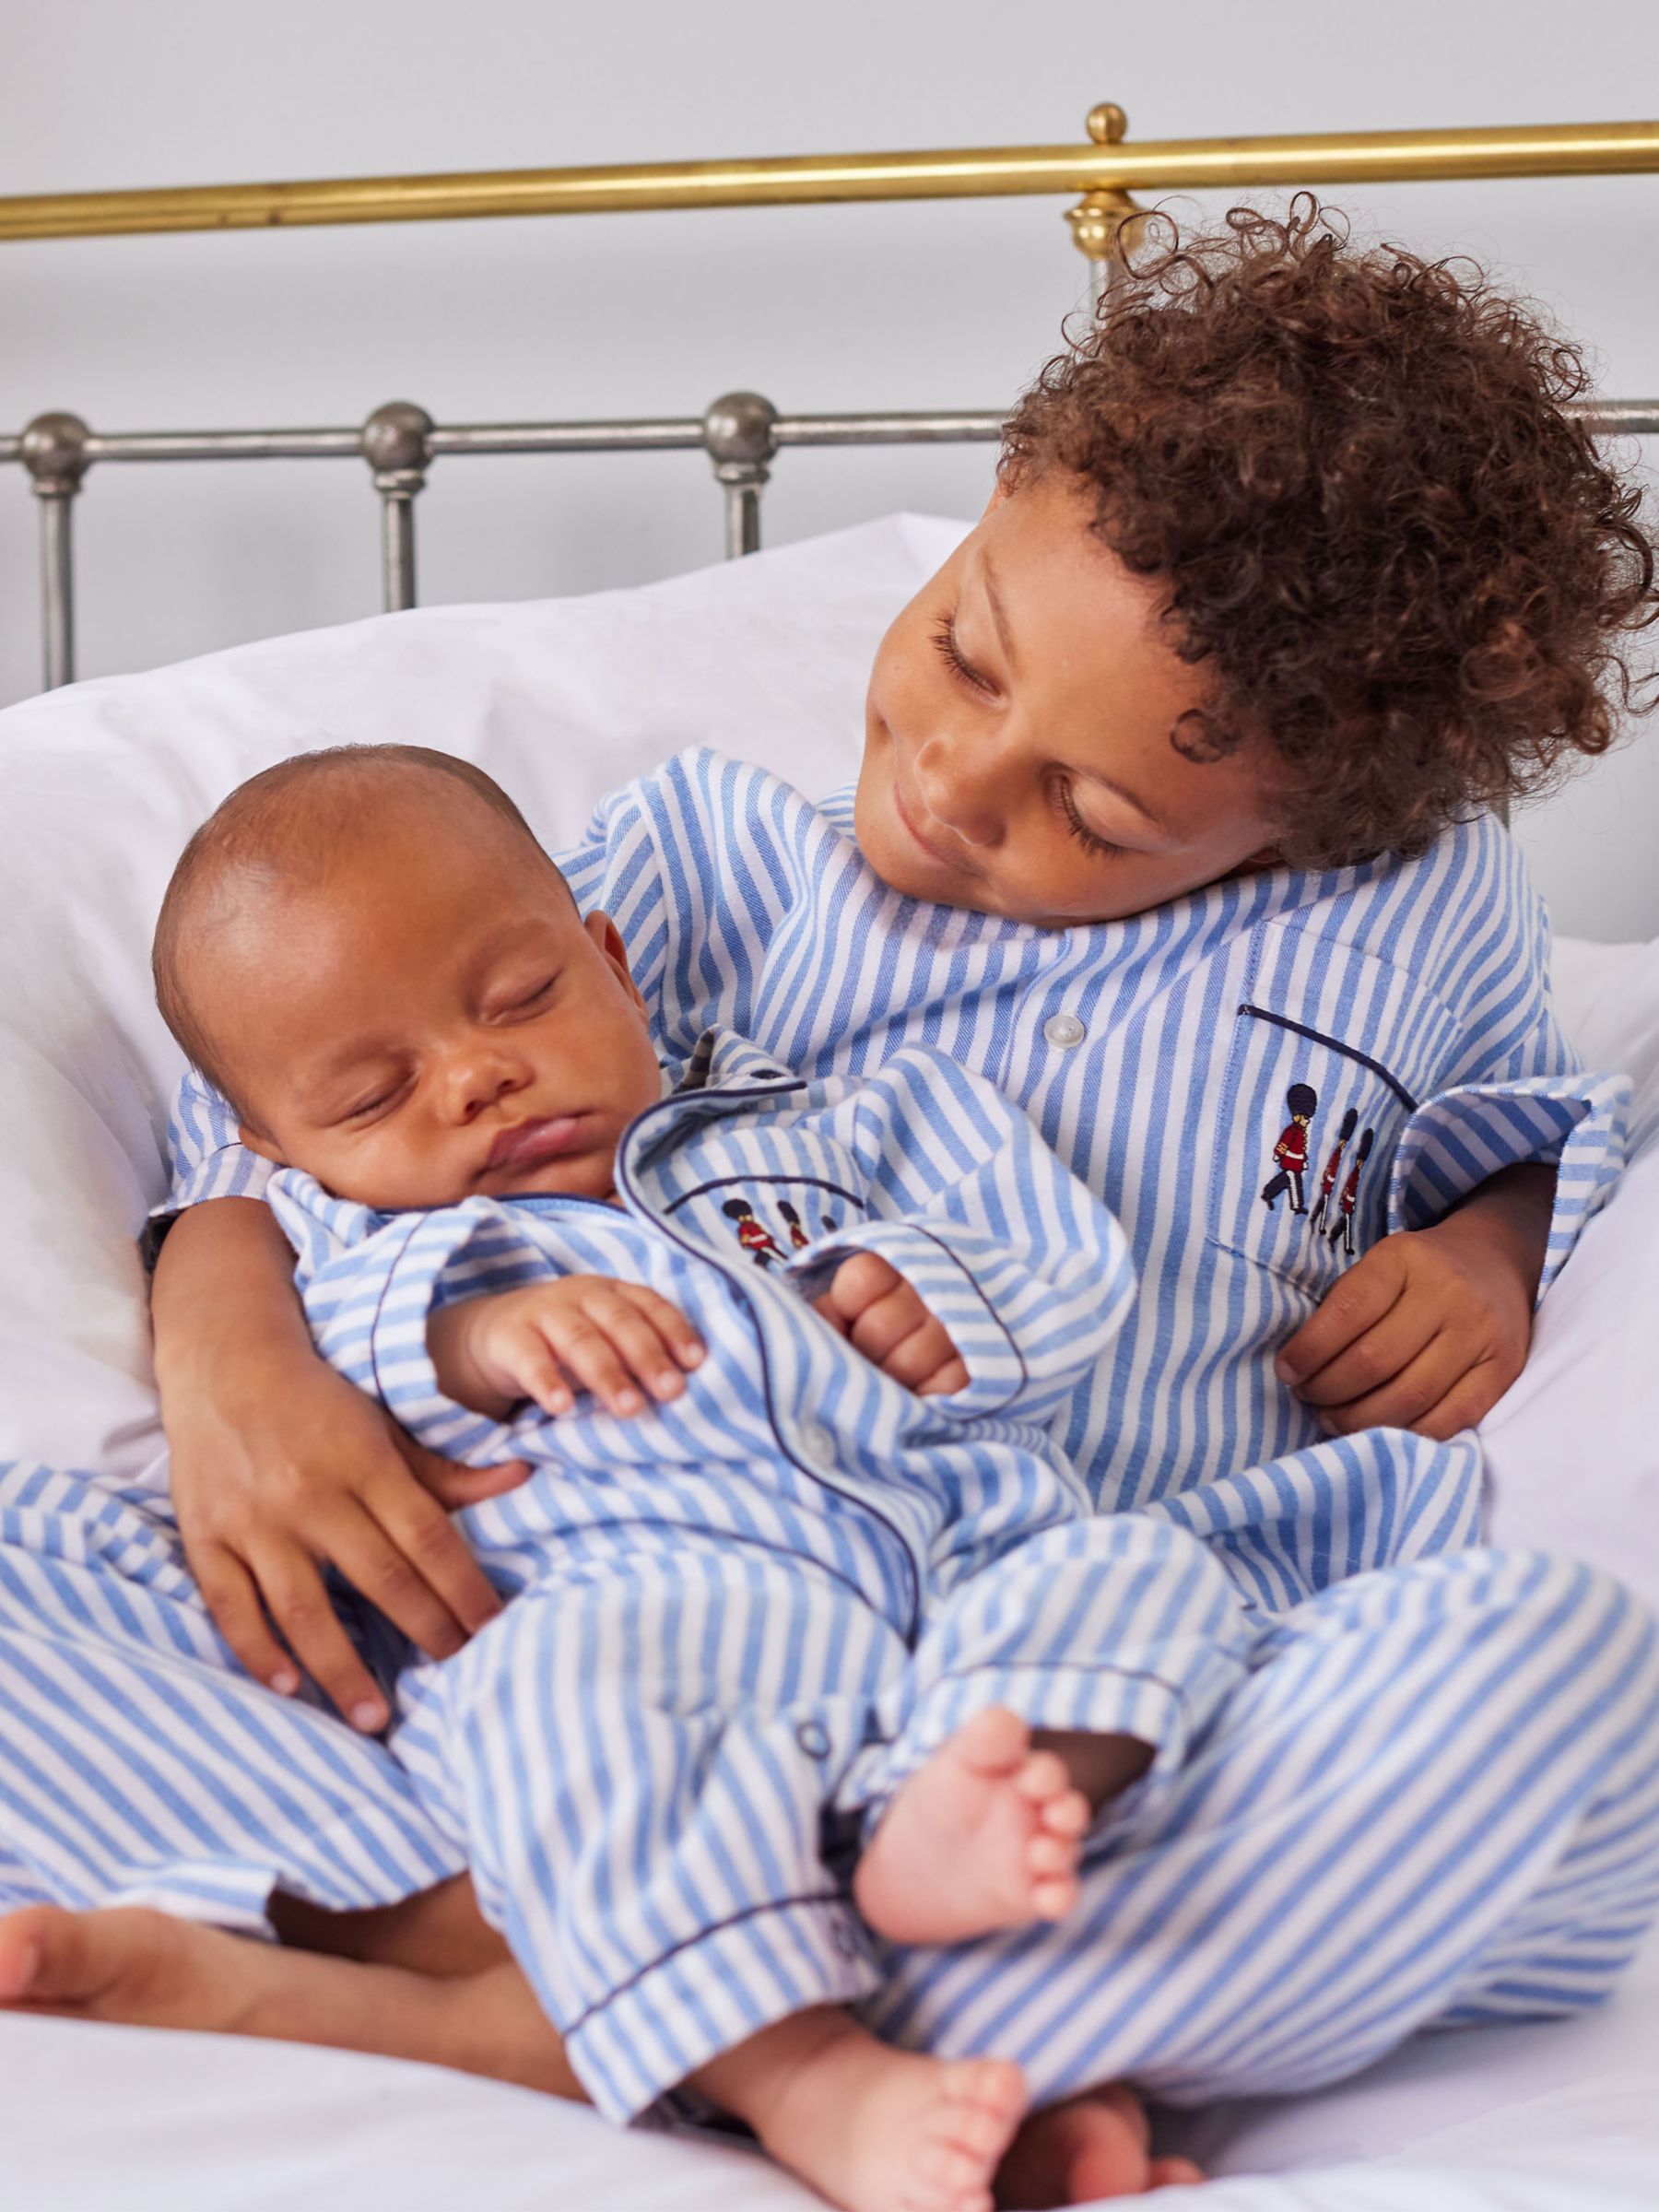 Buy Trotters Baby Felix All-In-One Pyjamas, Blue/White Online at johnlewis.com